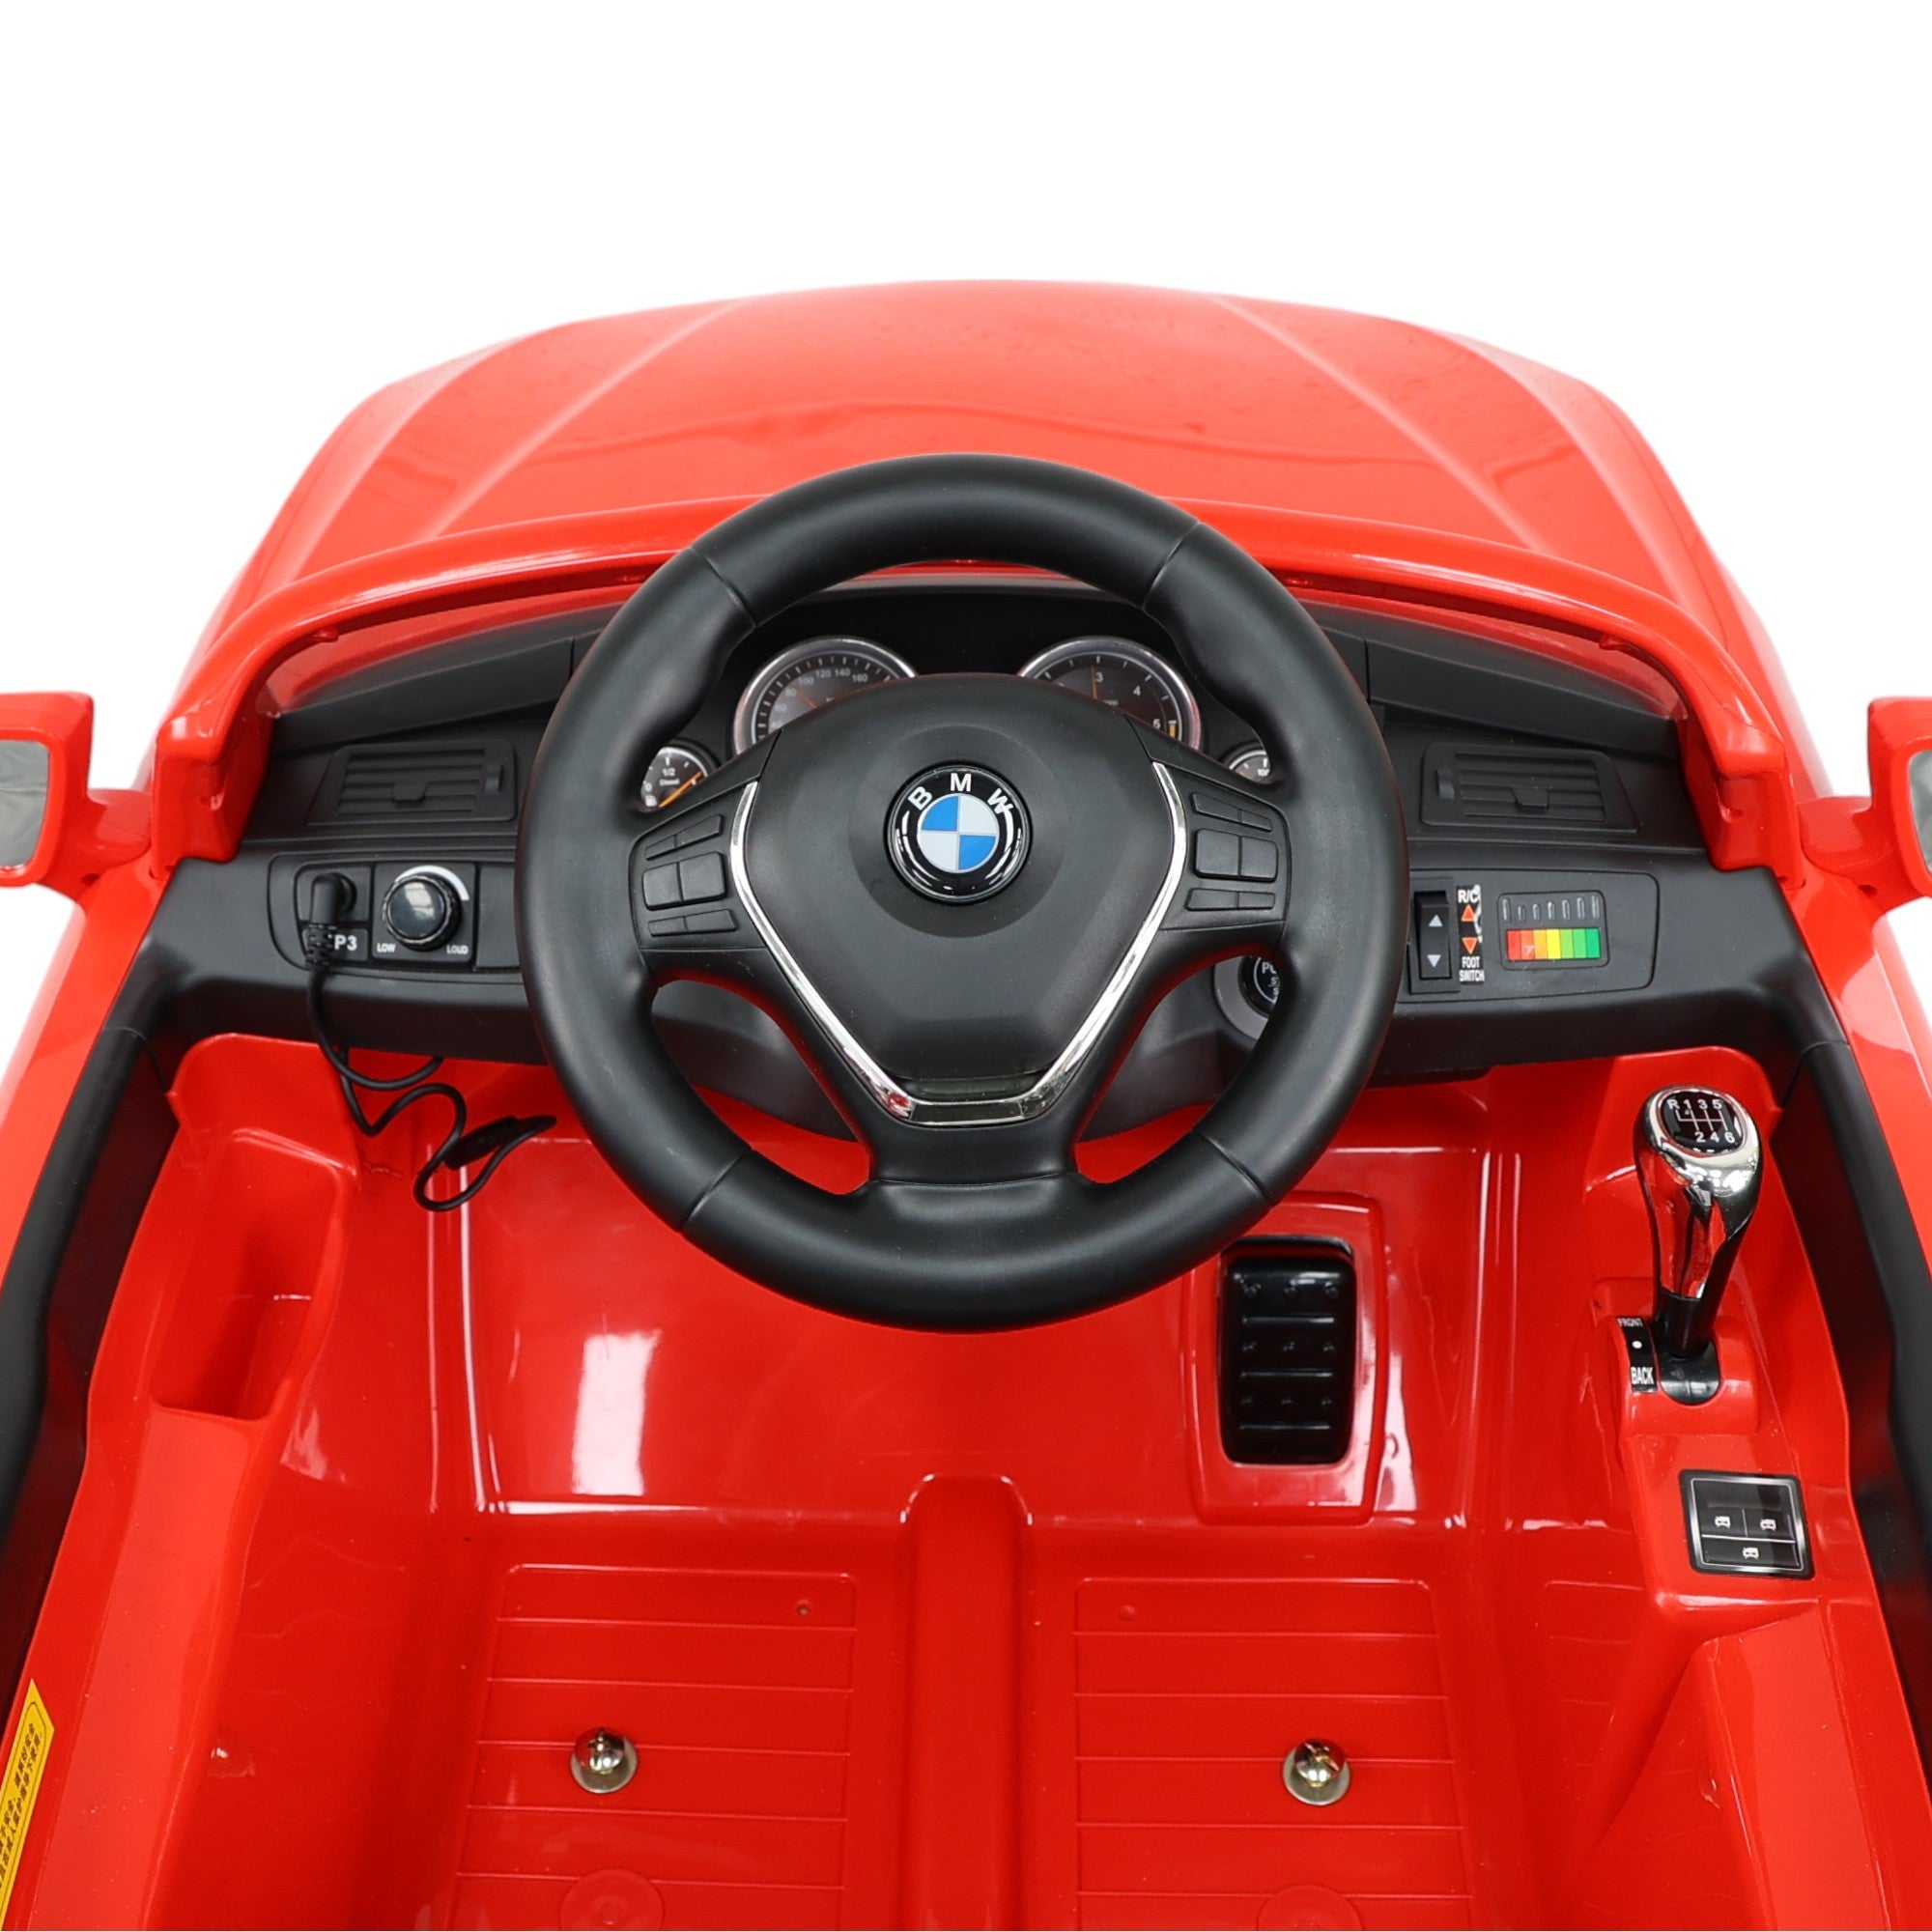 Child Barber Chairs - BMW 4 Series Red